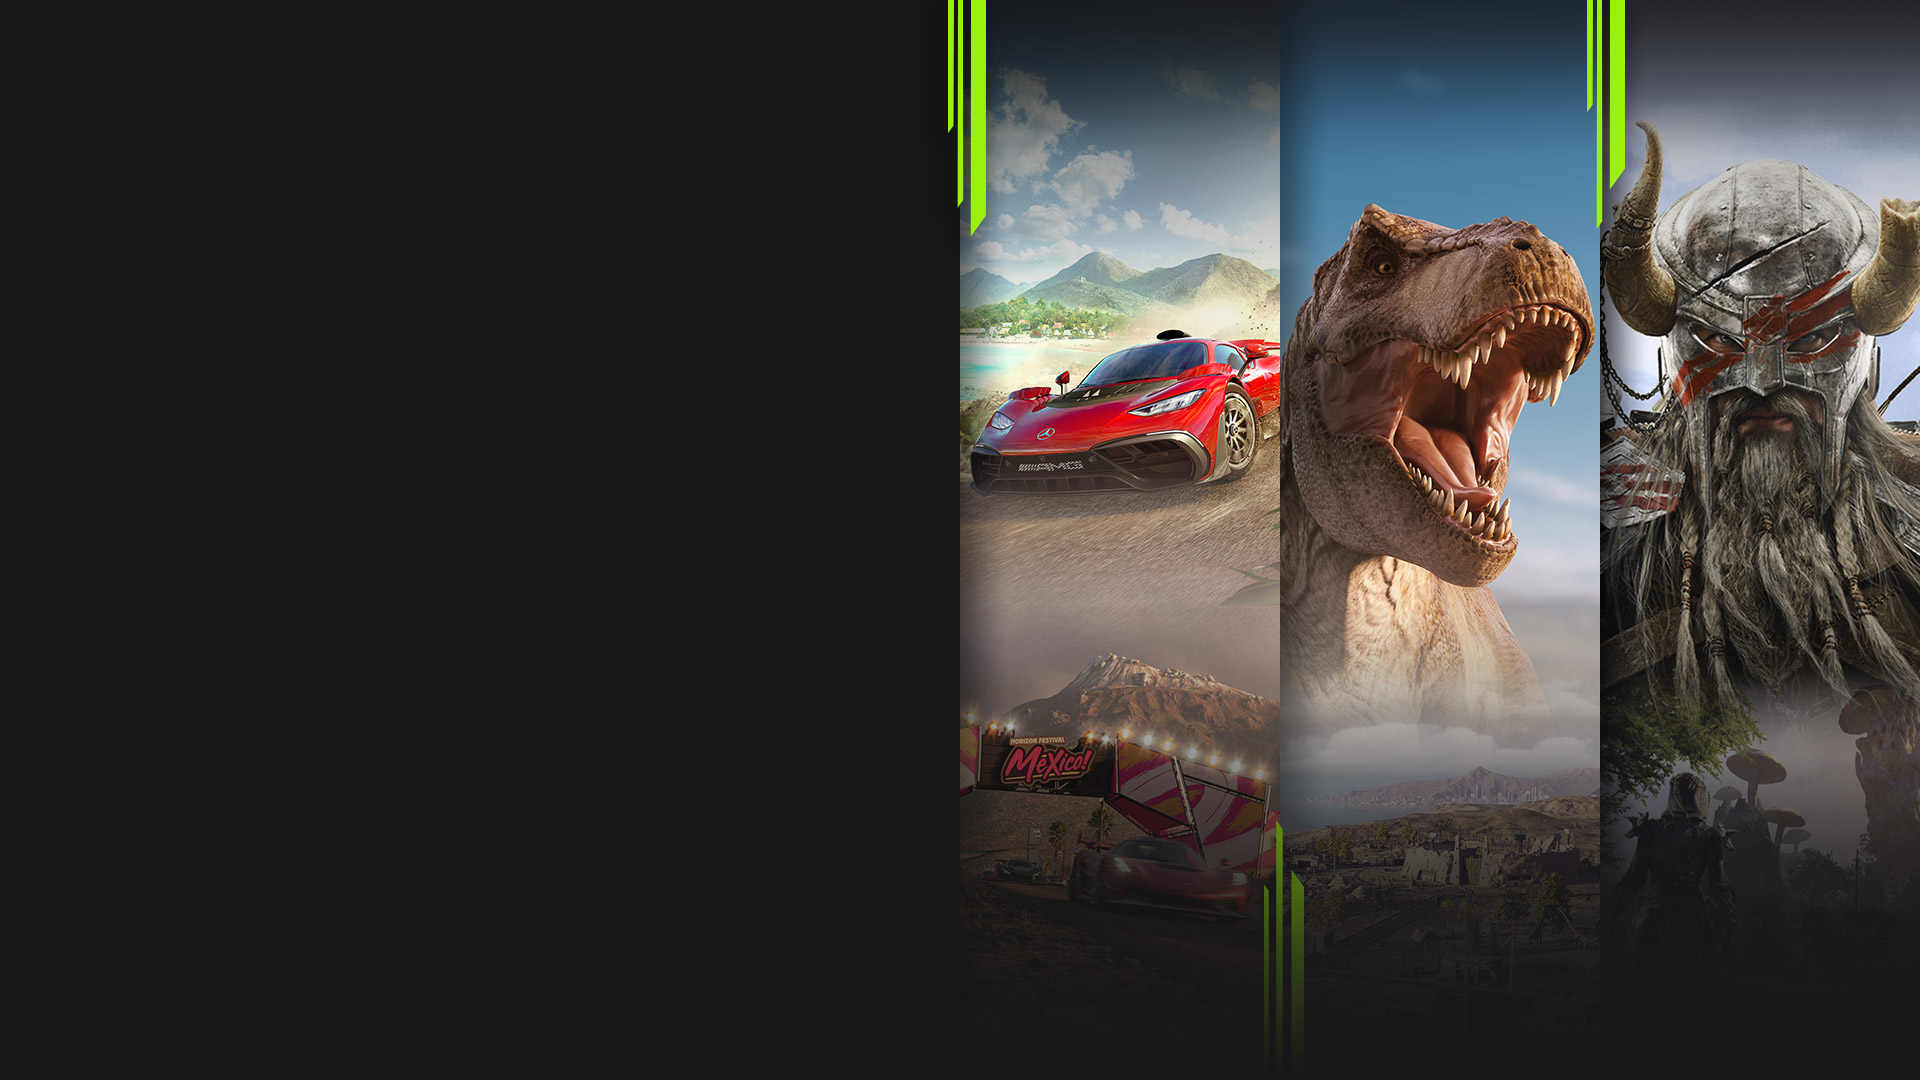 Game art from multiple games available now with Xbox Game Pass including Forza Horizon 5, Jurassic World Evolution 2, The Elder Scrolls Online and Halo Infinite.